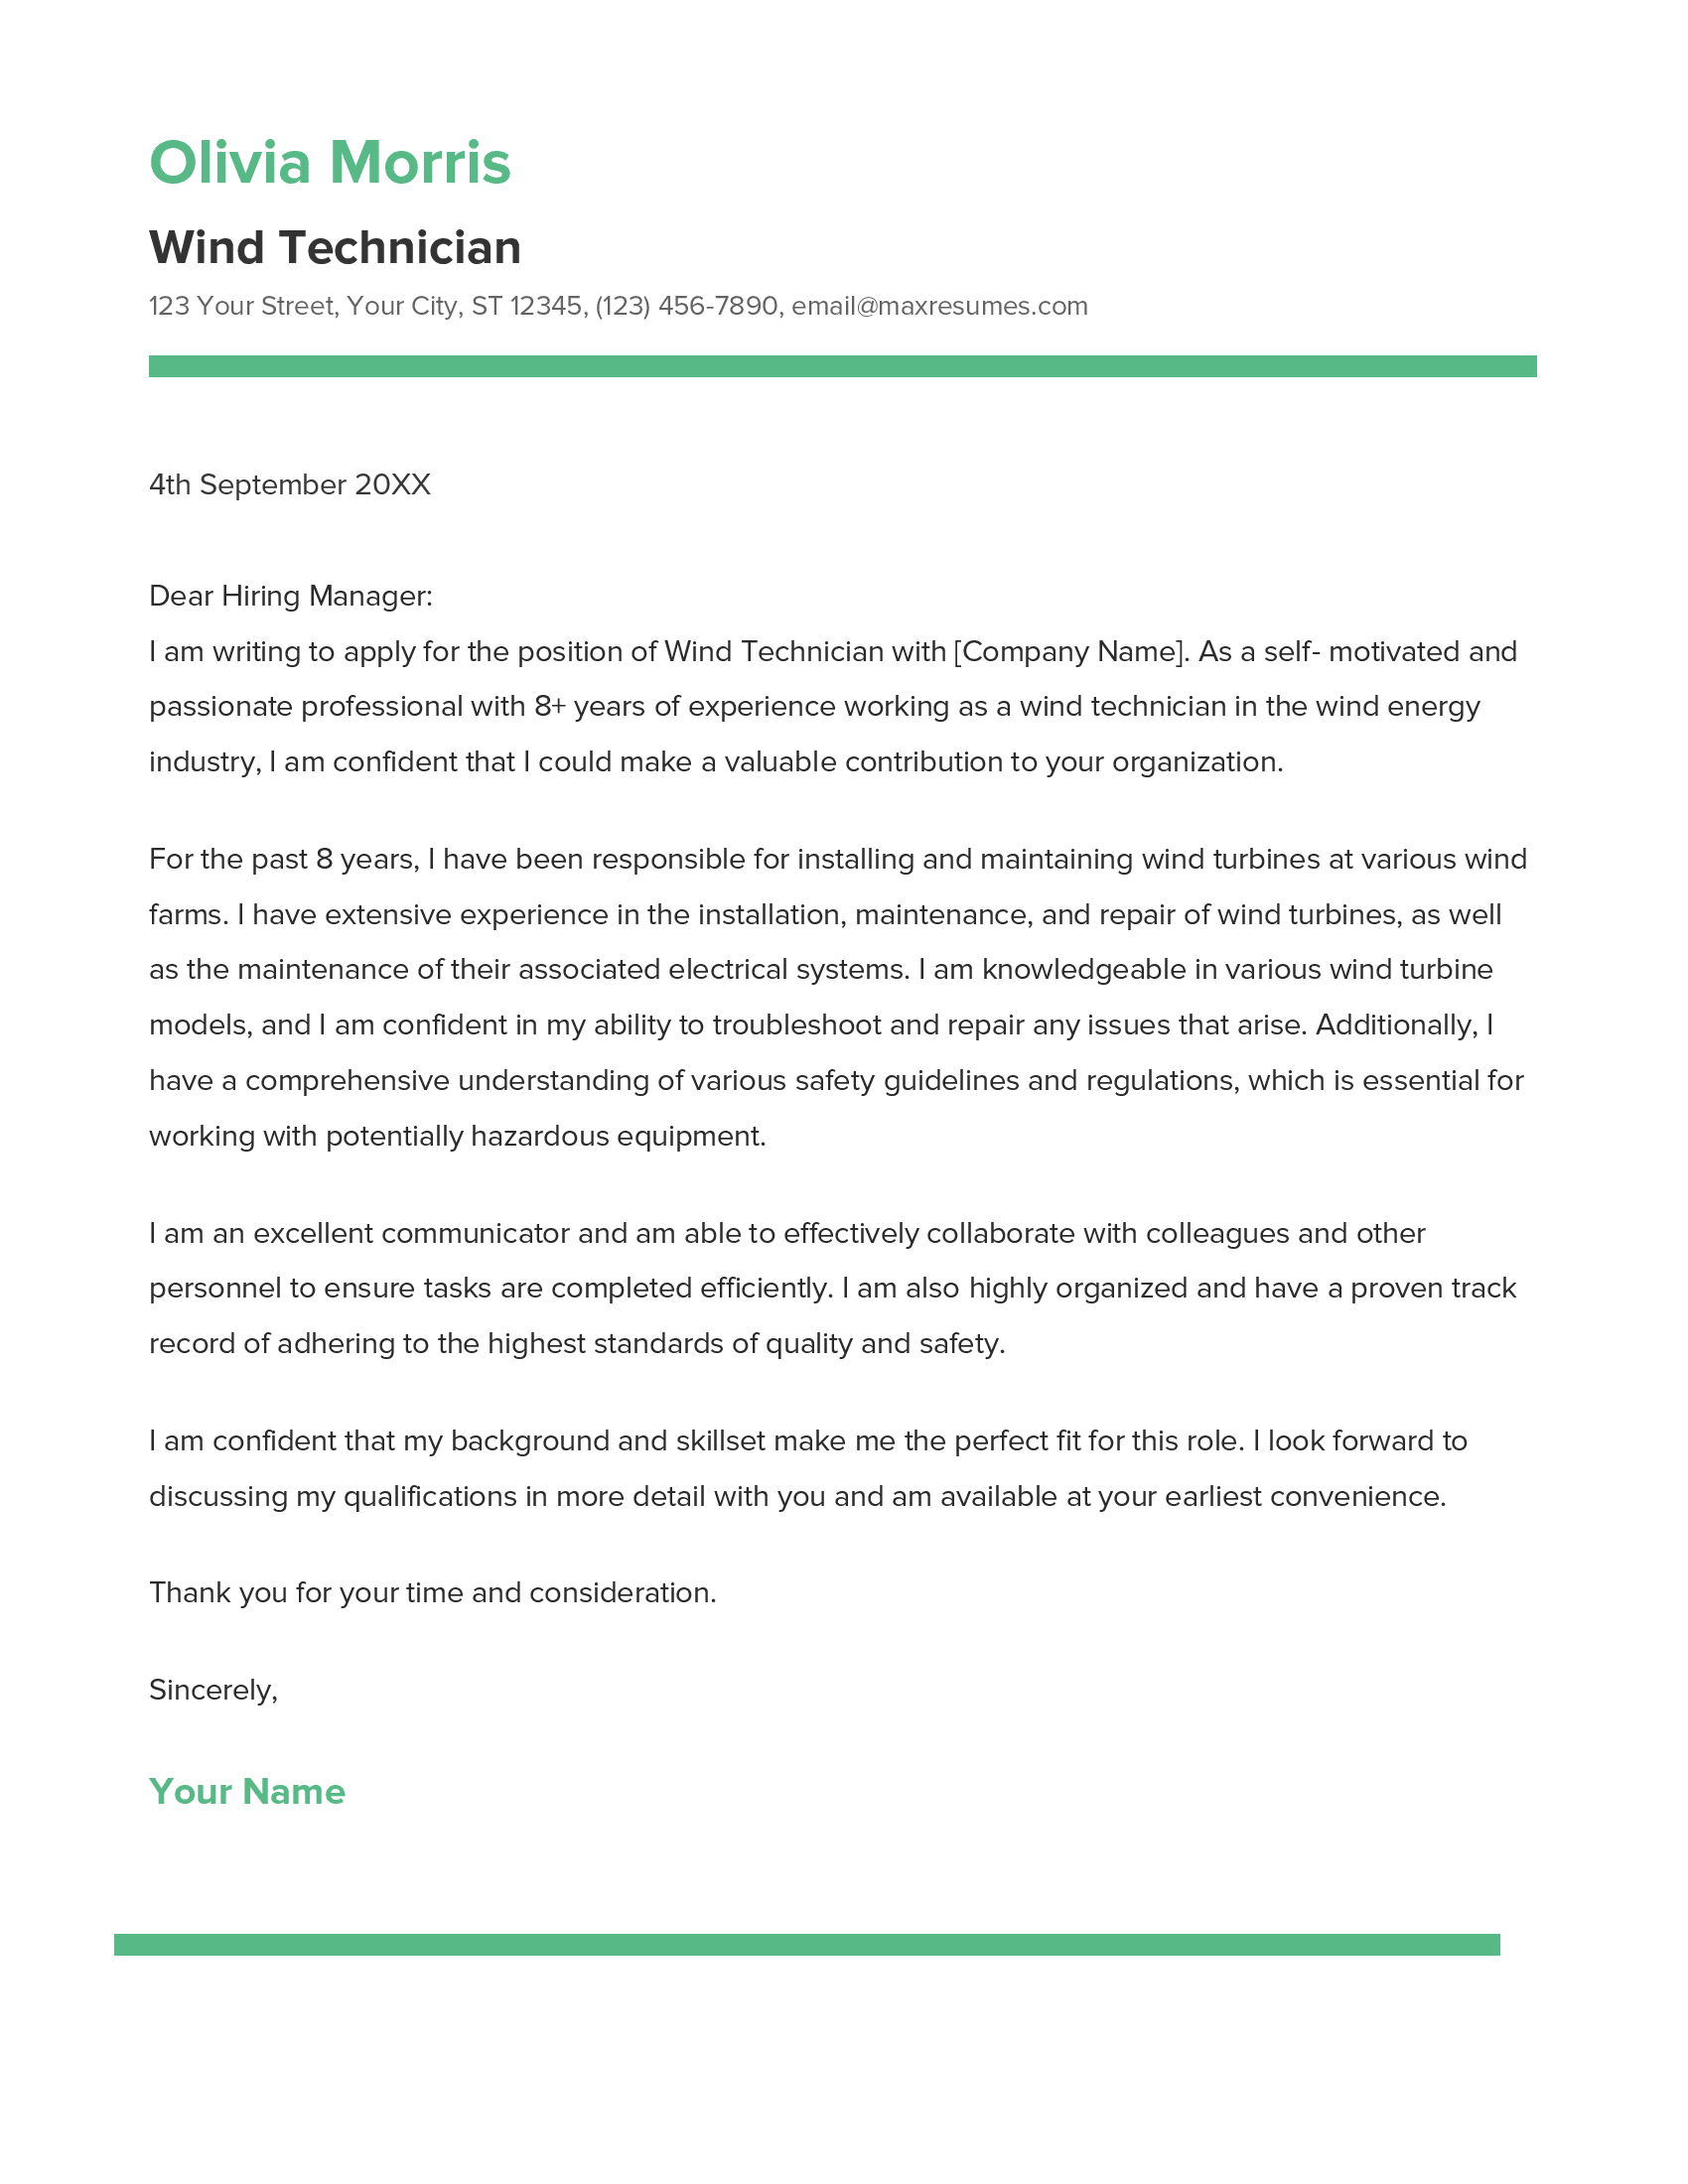 Wind Technician Cover Letter Example